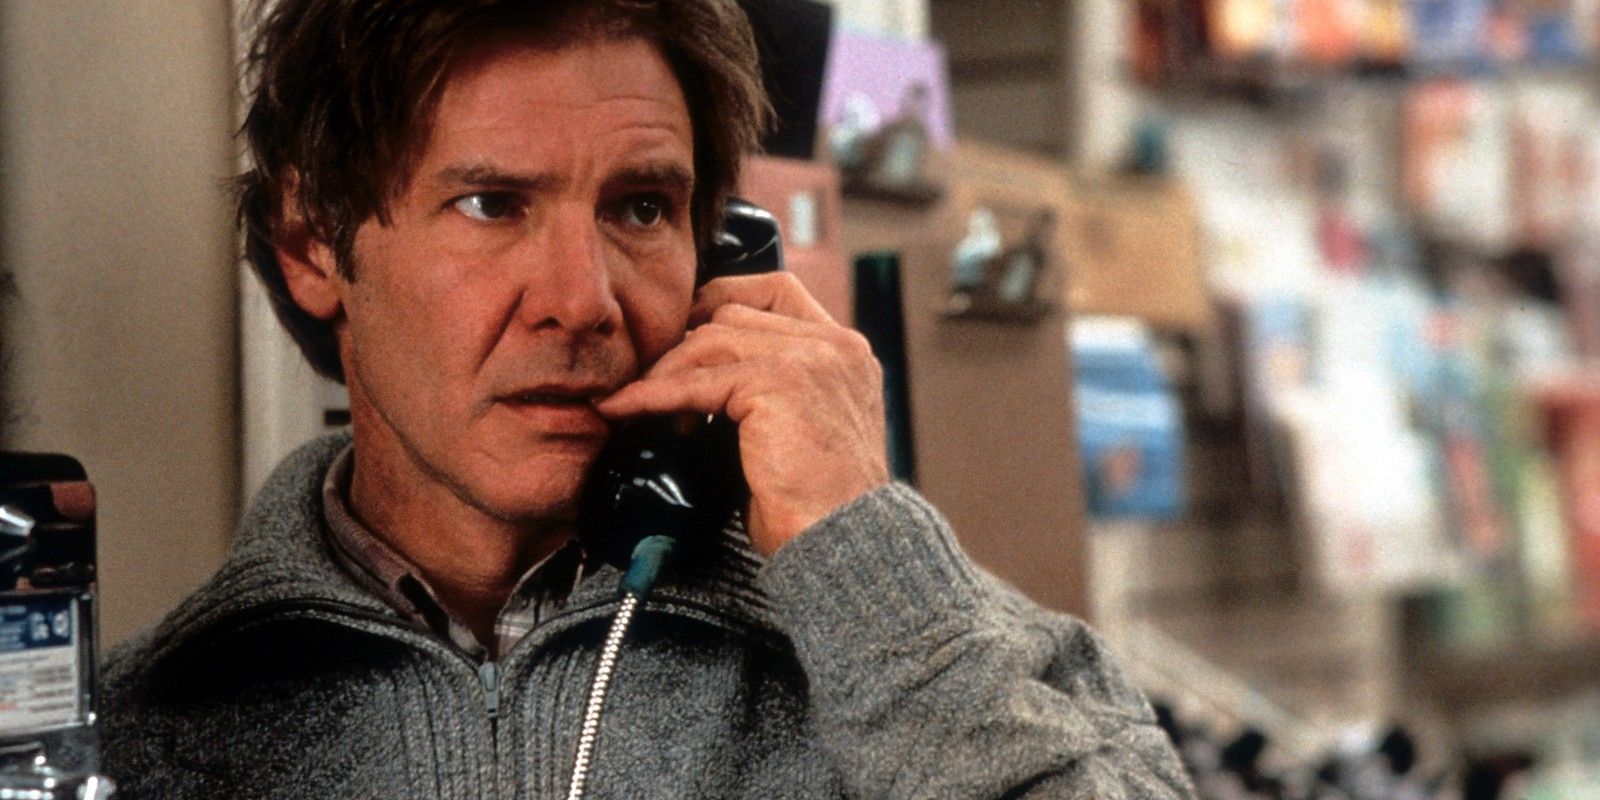 An image of Harrison Ford answering the phone as Dr. Richard Kimble in The Fugitive